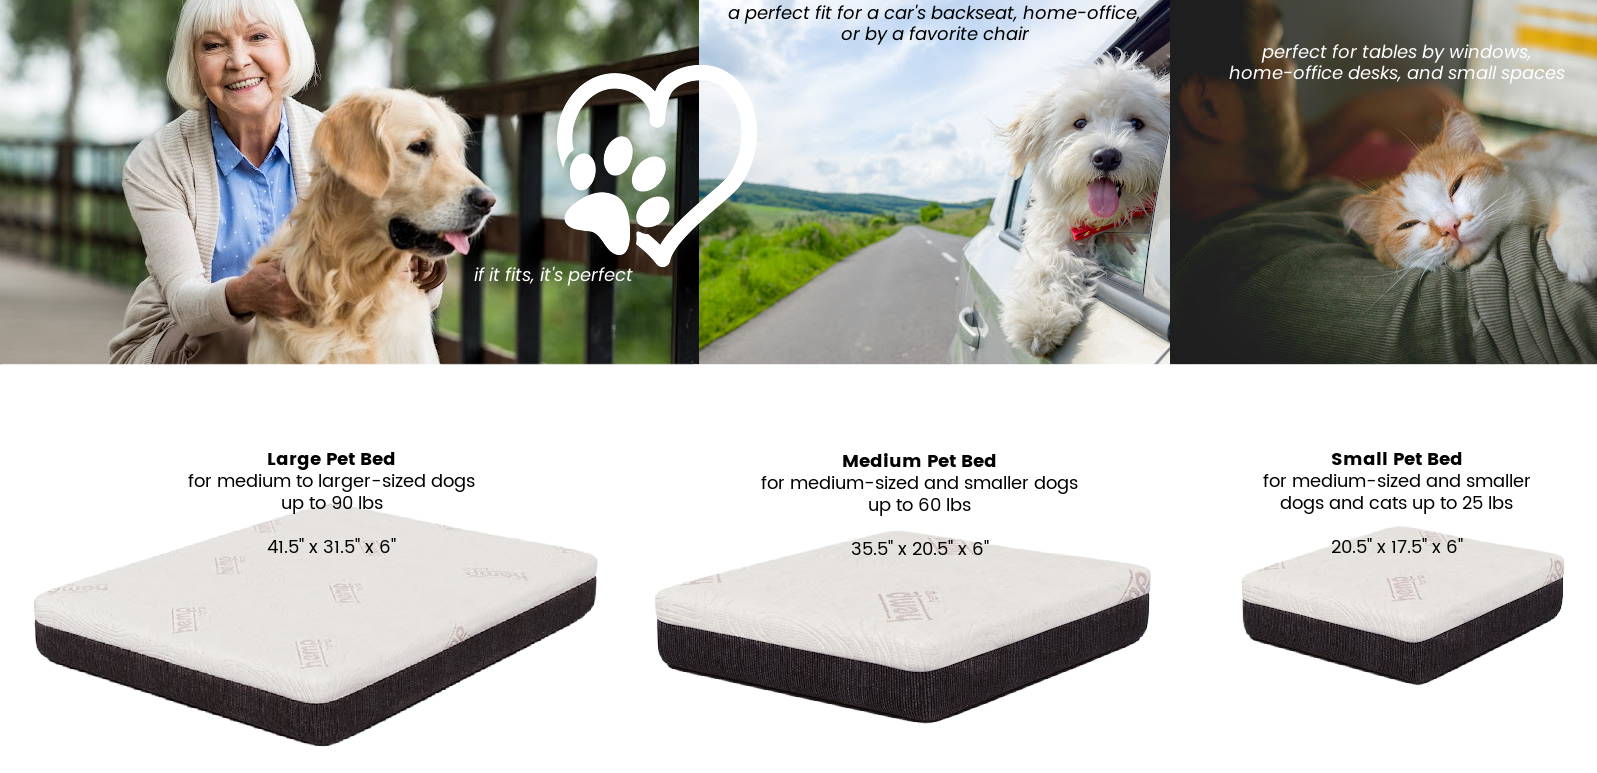 Showing the CannaBliss Pet Bed with CopperCelll in large, medium and small sizes being perfect for a car's backseat, home office, by windows, and small spaces